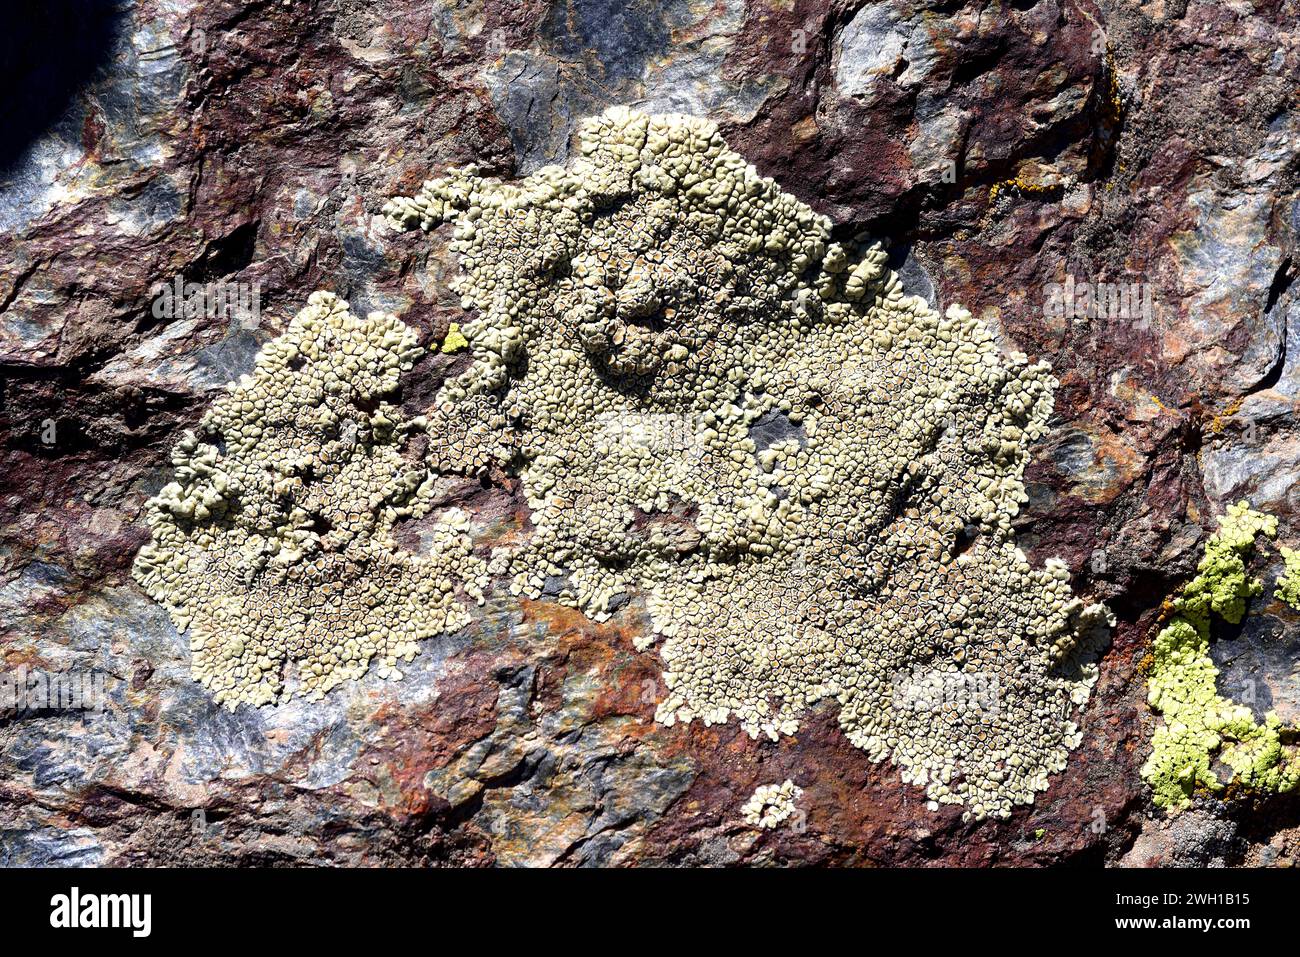 Lecanora muralis is a crustose lichen that grows on siliceous and limestone rocks. This photo was taken in Sierra Nevada National Park, Granada provin Stock Photo